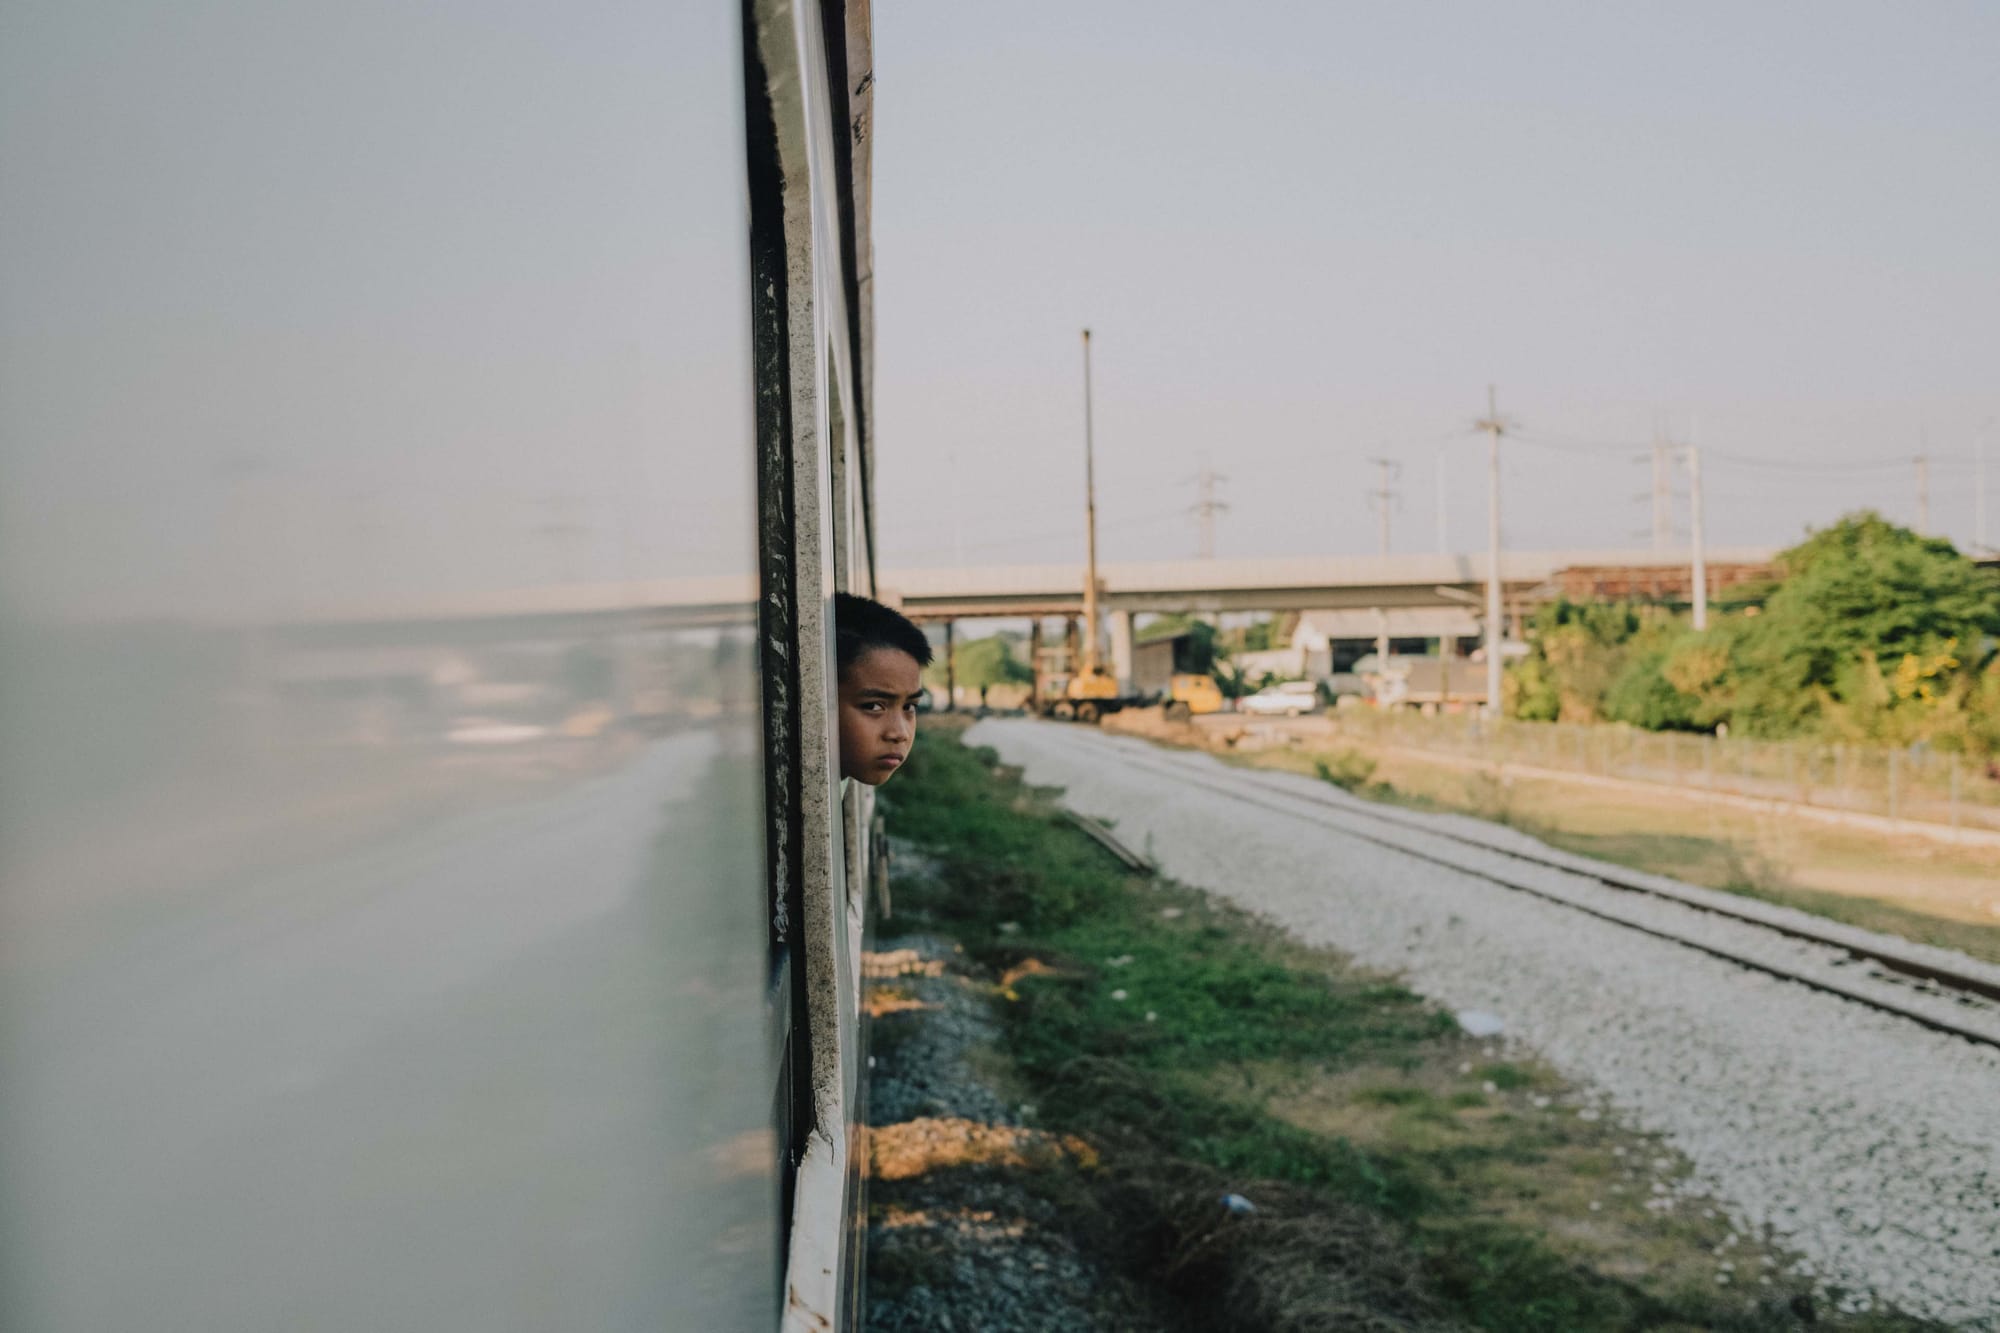 A child sticks his head out of the window of a moving train in Thailand with the rural landscape in the background